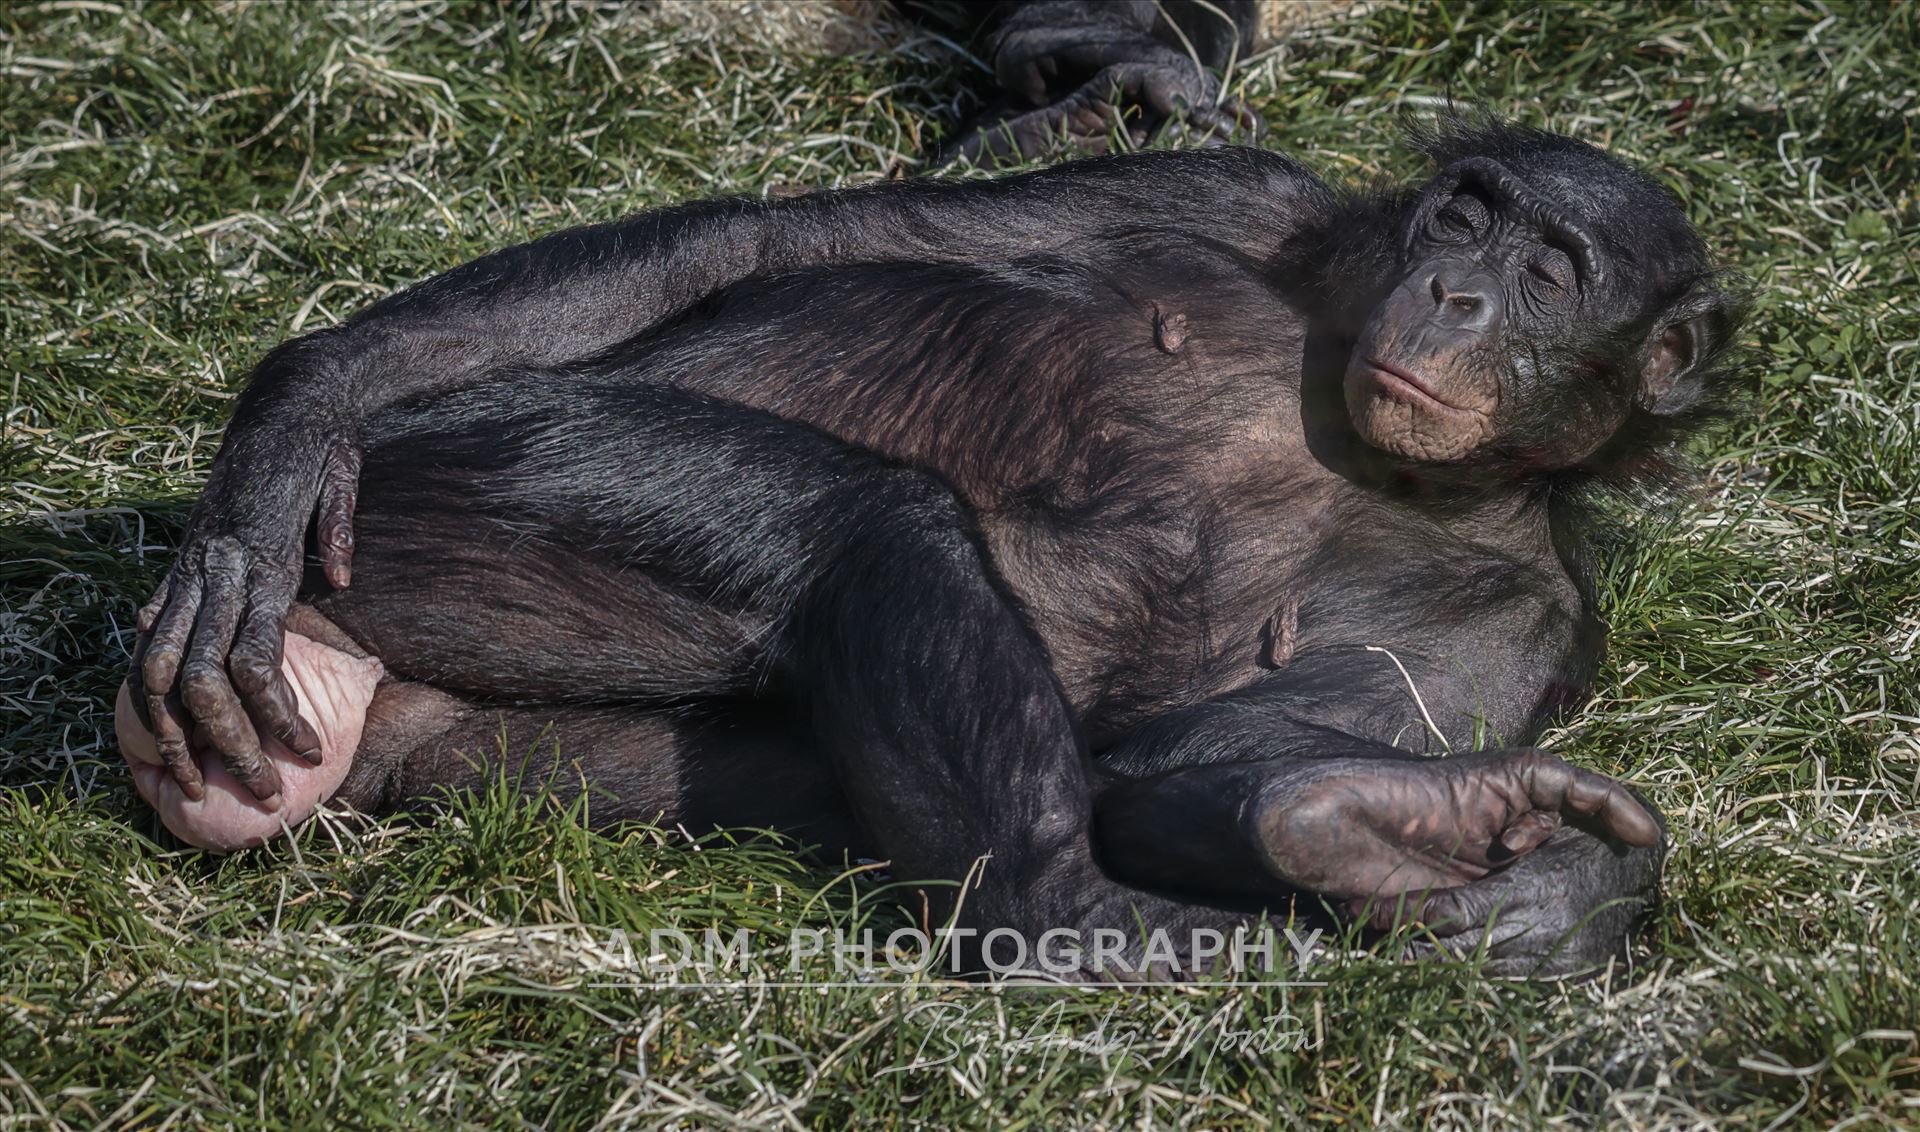 Bonobo Chimpanzee The Taxonomical genus Pan consists of two extant species: the common chimpanzee and the bonobo. Together with humans, gorillas and orangutans they are part of the family Hominidae. by Andy Morton Photography